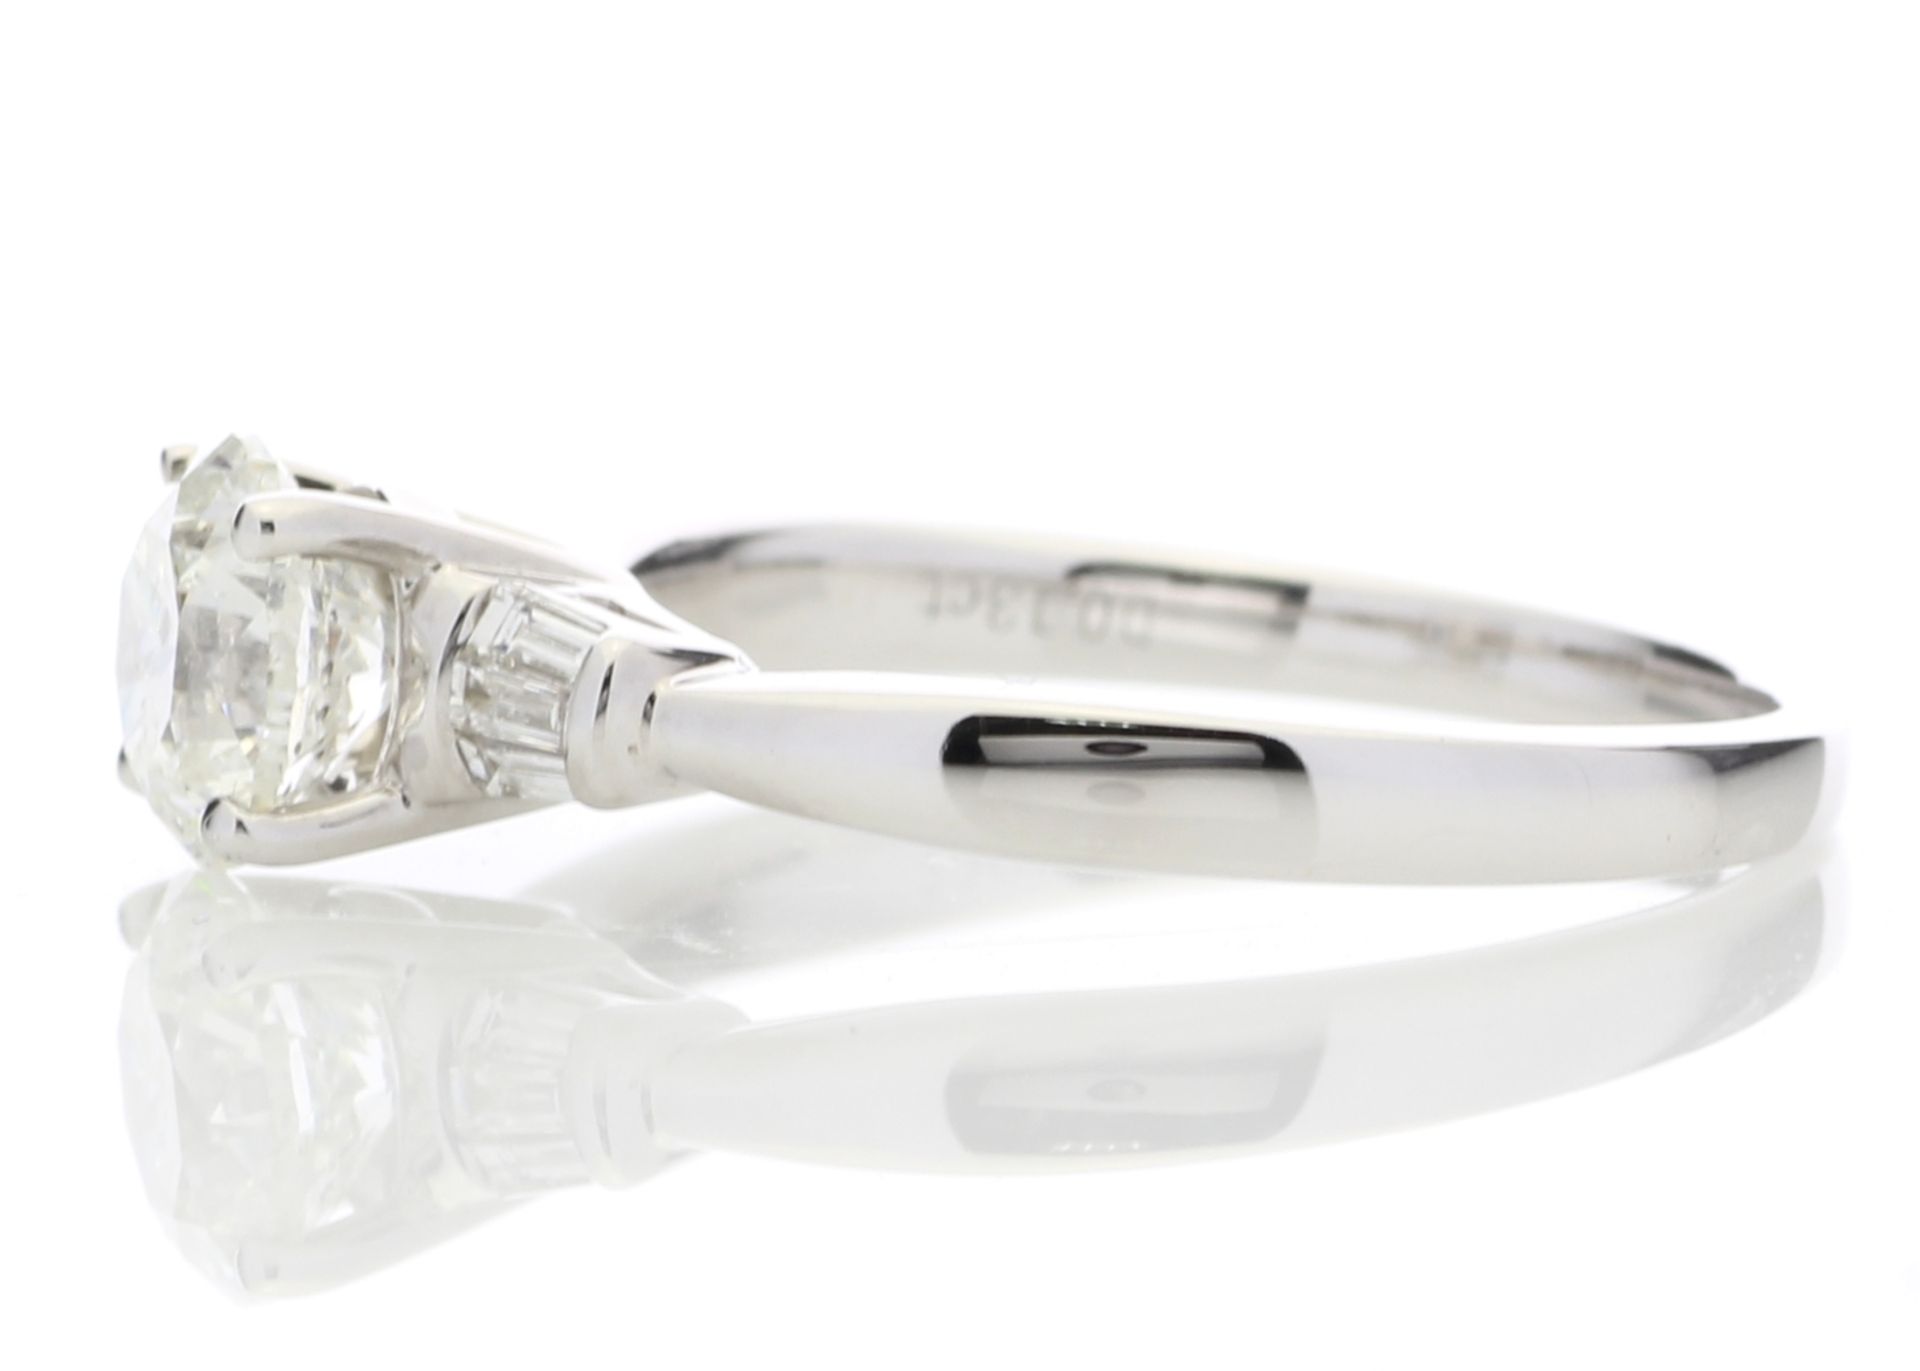 18ct White Gold Single Stone Diamond Ring With Baguette (1.02) 1.15 Carats - Image 3 of 5